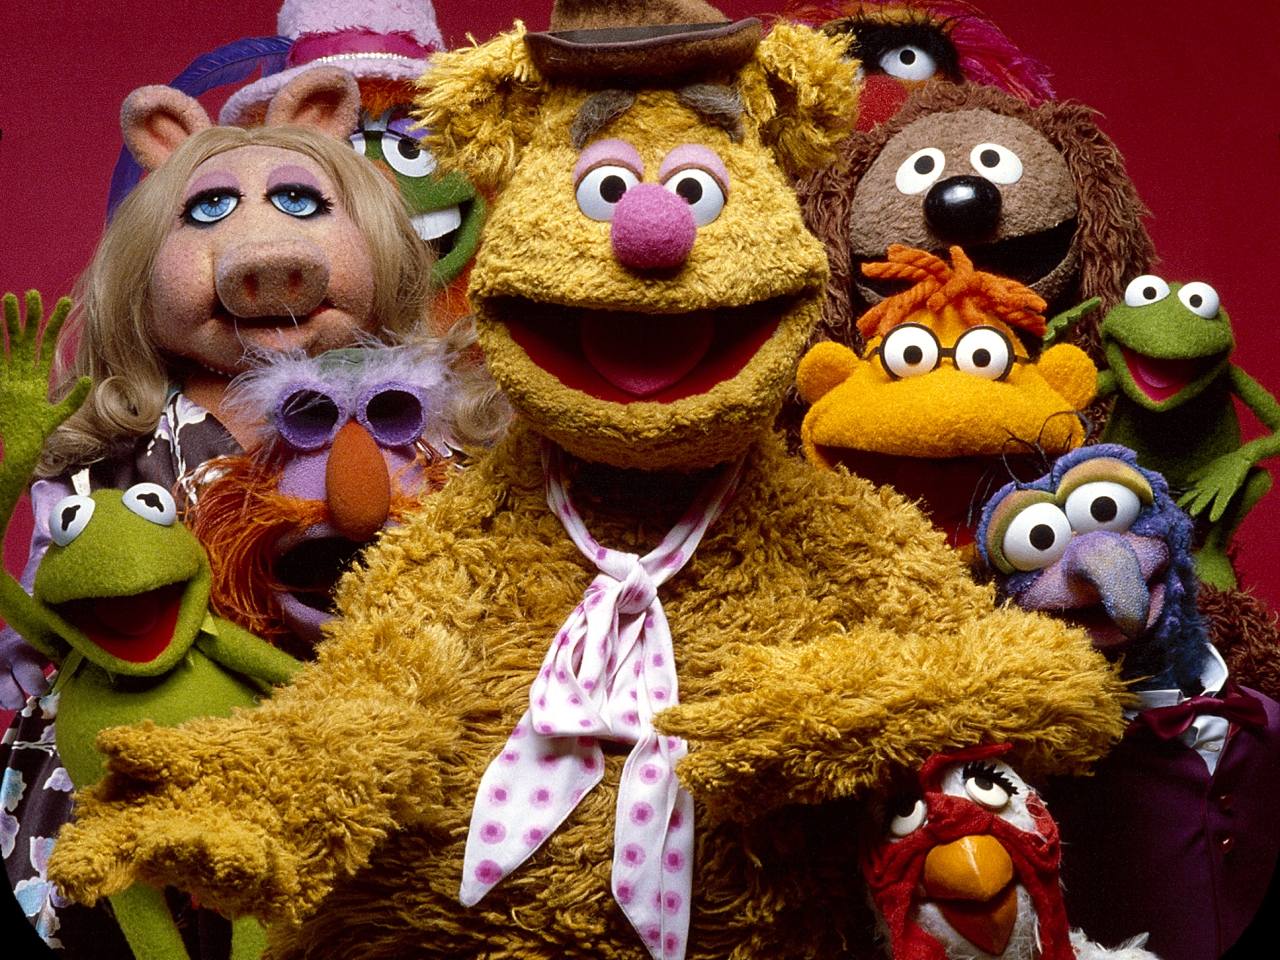 Image detail for -The Muppets Wallpaper. Kids Wallpaper Gallery